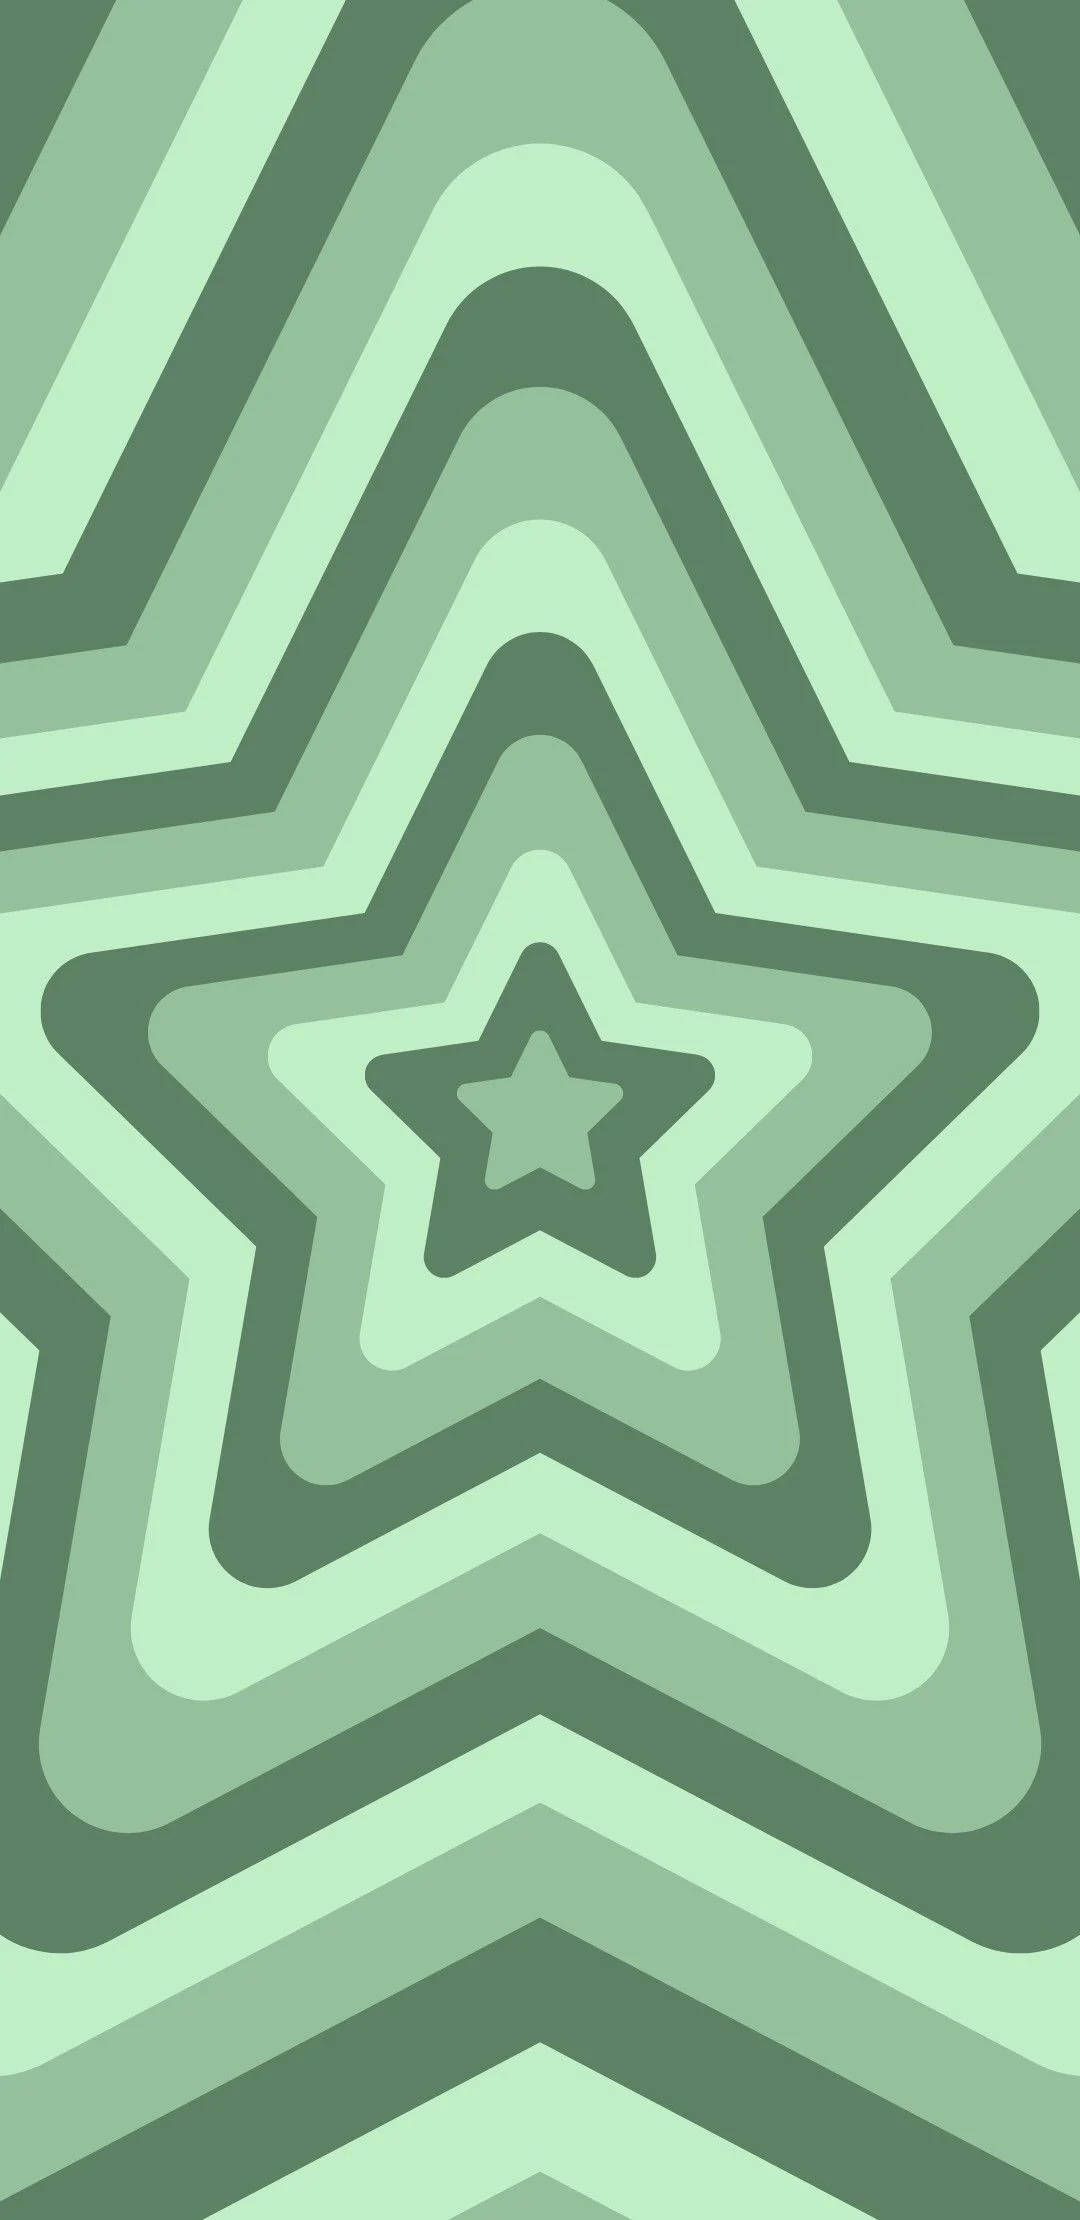 Wallpaper Star with high-resolution 1080x1920 pixel. You can use this wallpaper for your Windows and Mac OS computers as well as your Android and iPhone smartphones - Preppy